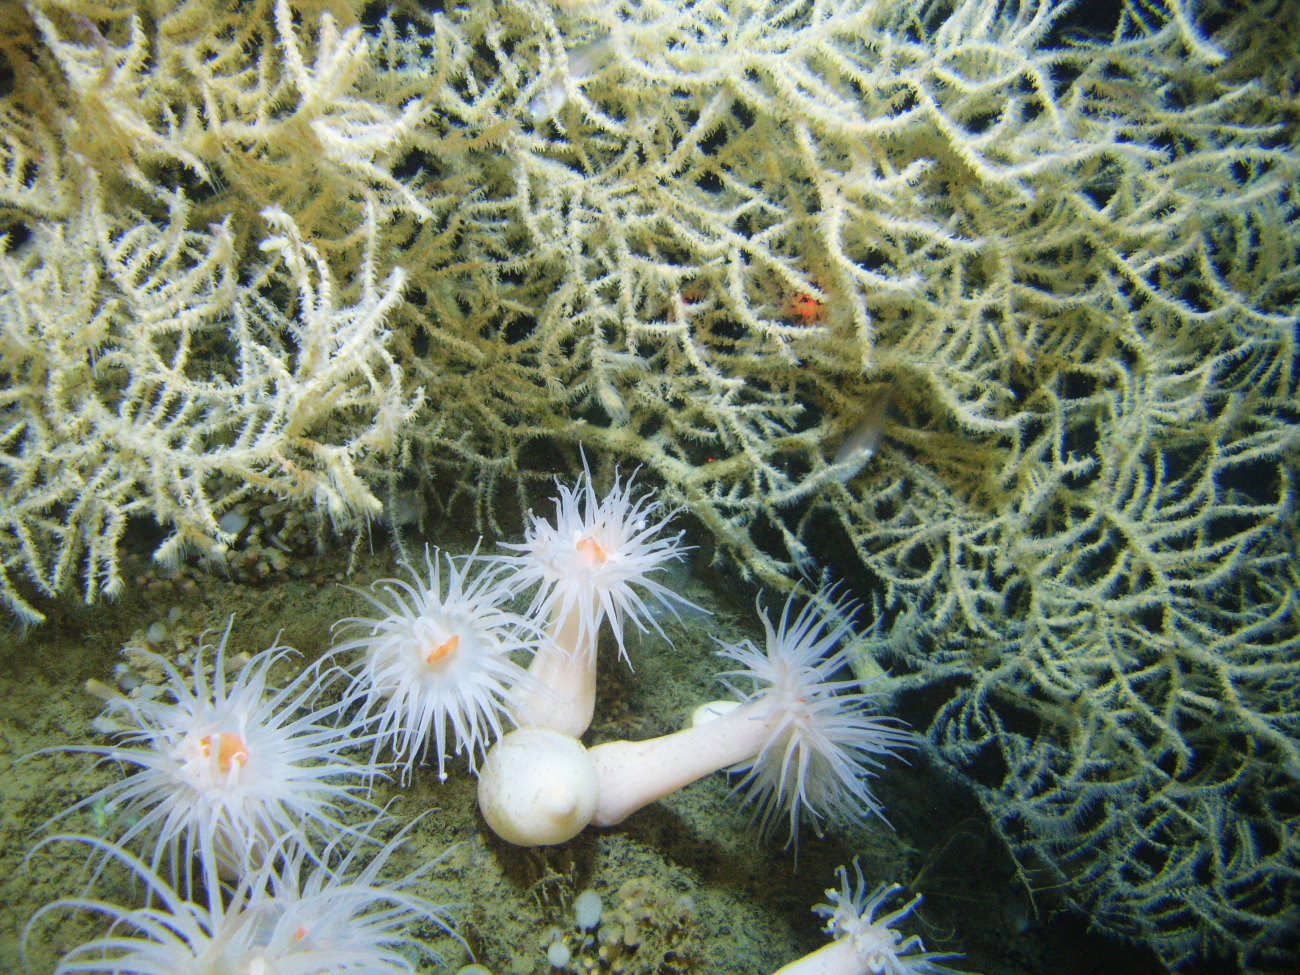 Large white anemones with orange mouths and a stand of white black coral